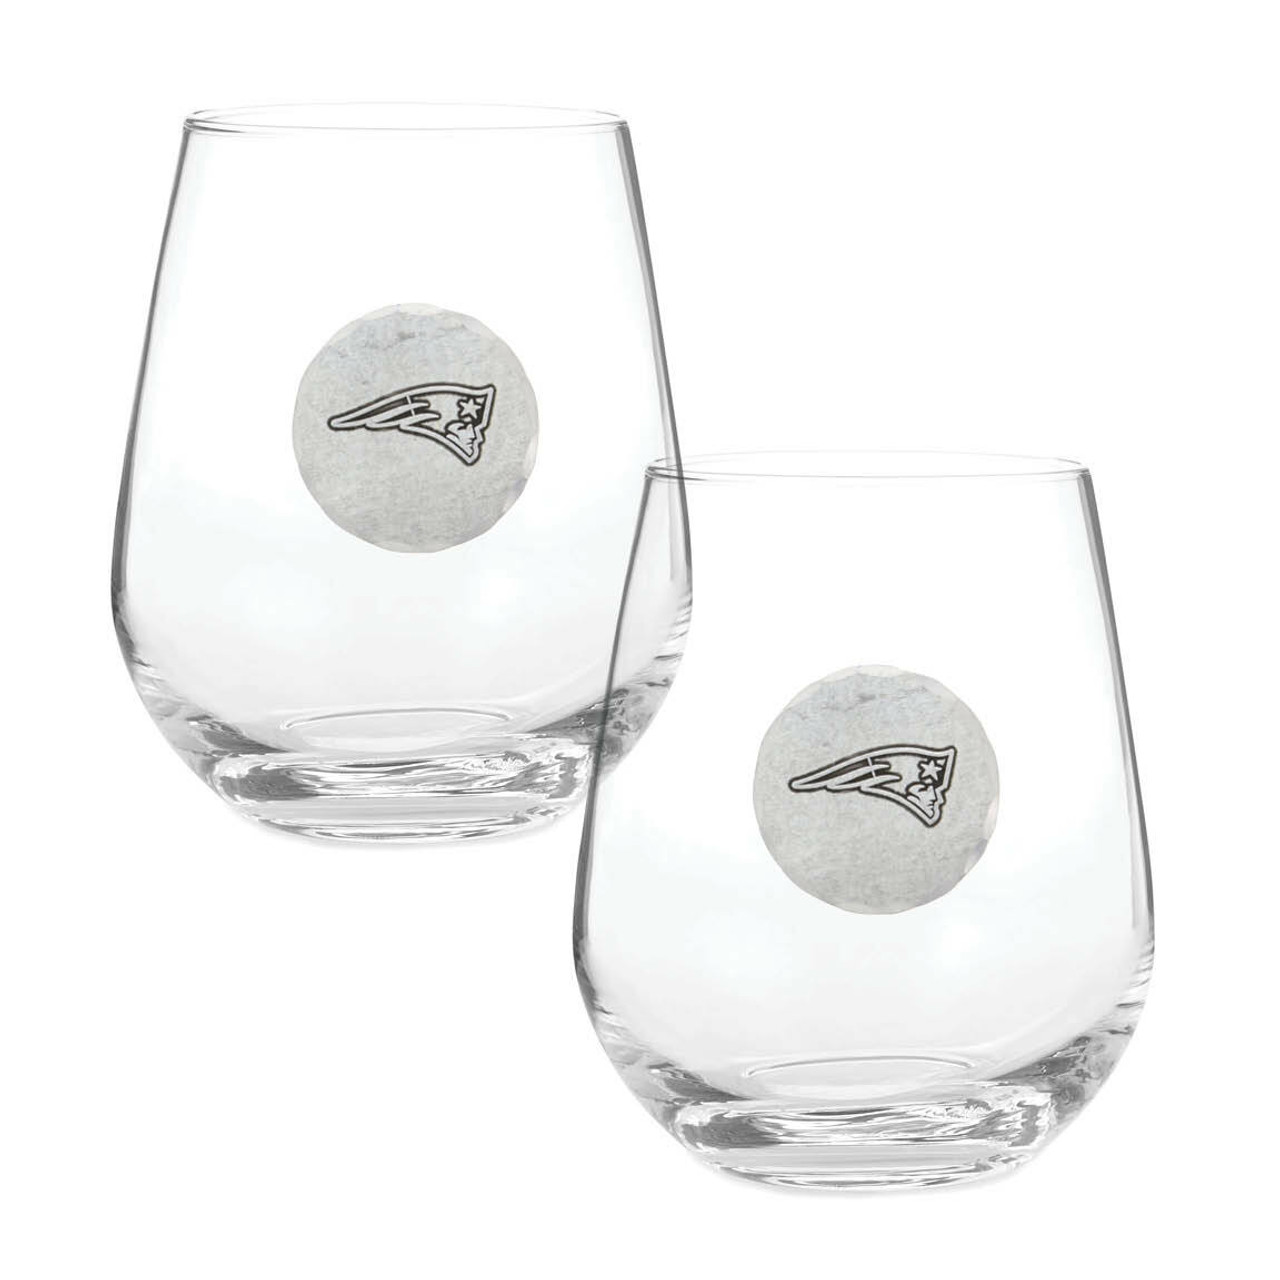 https://cdn11.bigcommerce.com/s-ekmdhvvdto/images/stencil/1280x1280/products/7289/16283/new-england-patriots-stemless-wine-glass-set-and-collectors-box-wendell-august__66598.1632498684.jpg?c=2